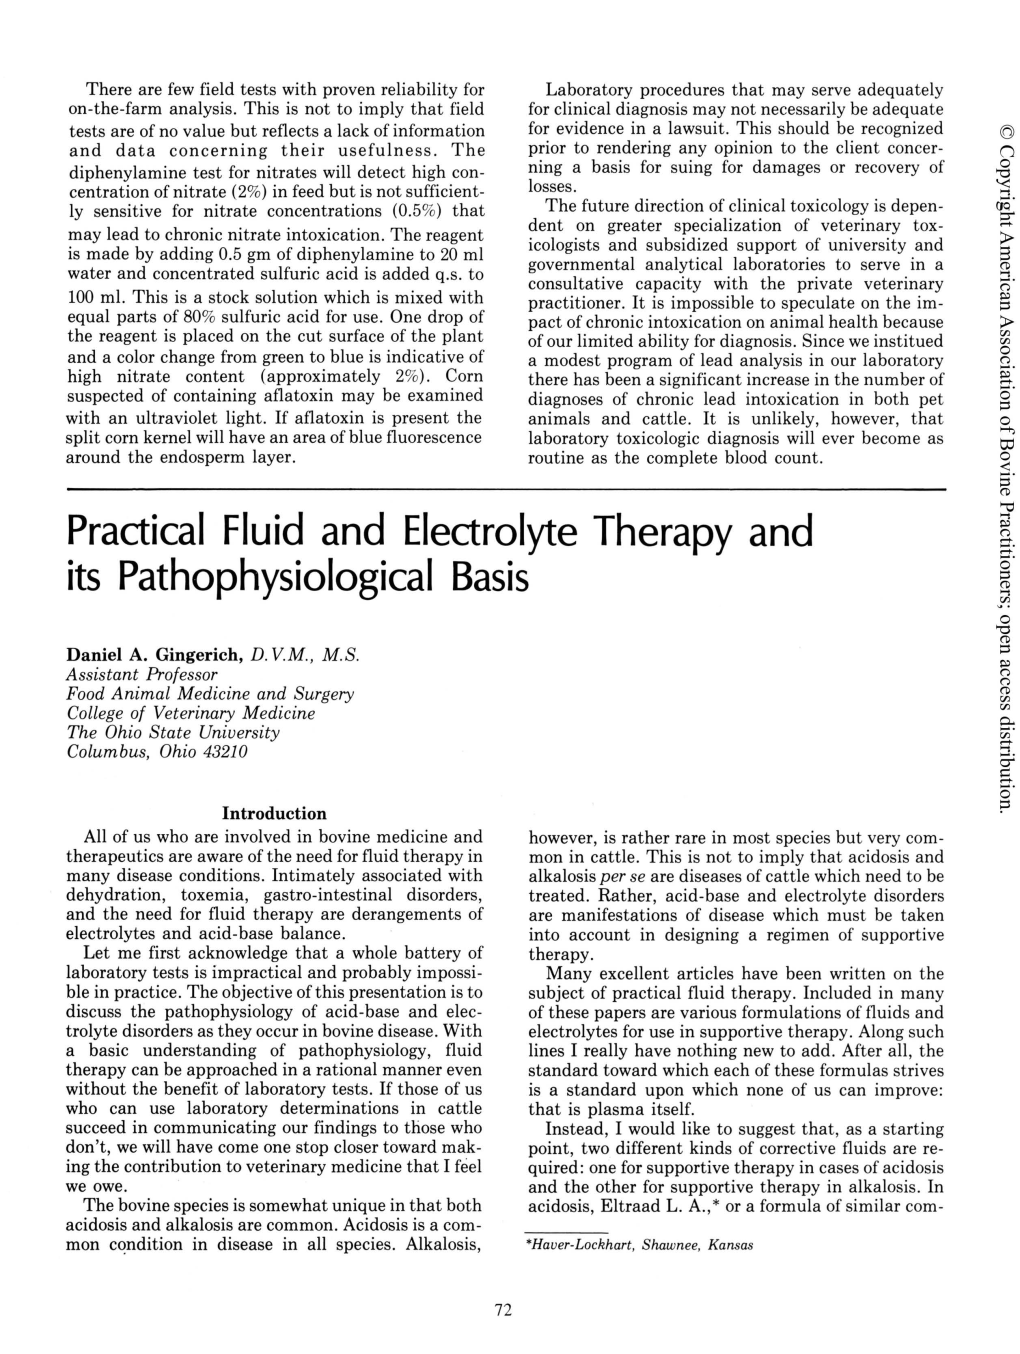 Practical Fluid and Electrolyte Therapy and Its Pathophysiological Basis